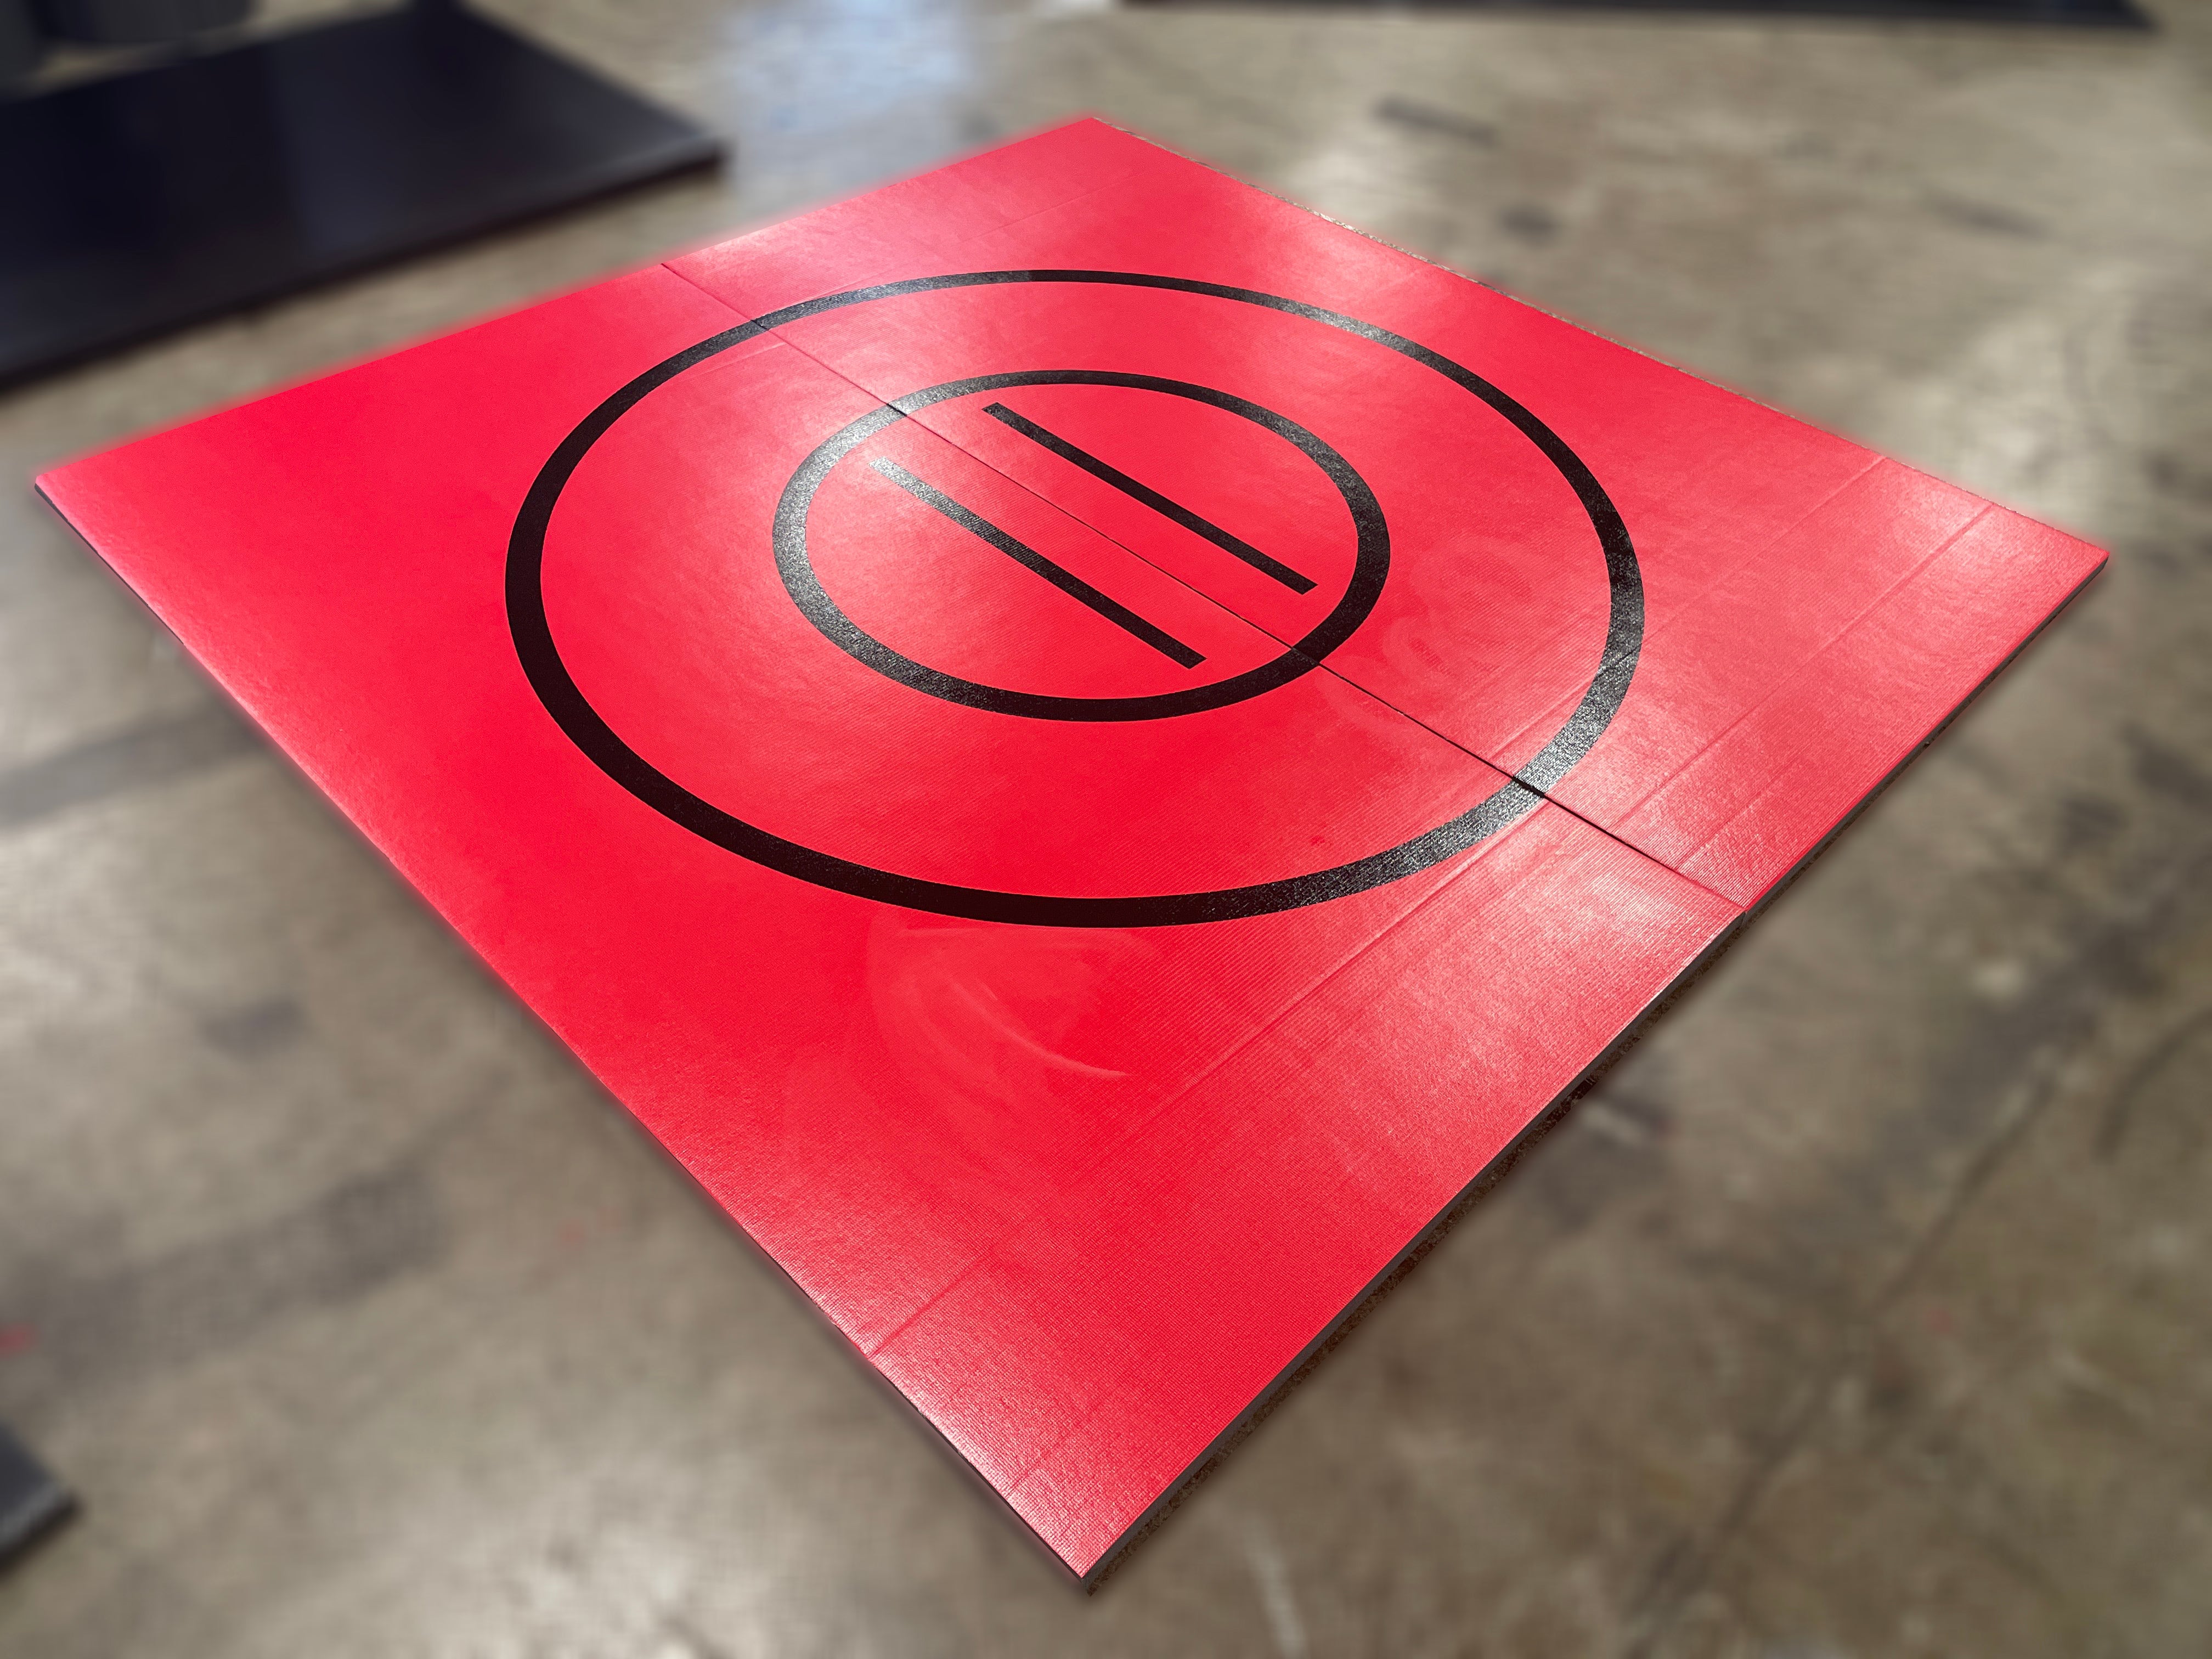 Clearance 8' x 8' x 1 3/8" Roll-Up wrestling Mat Red